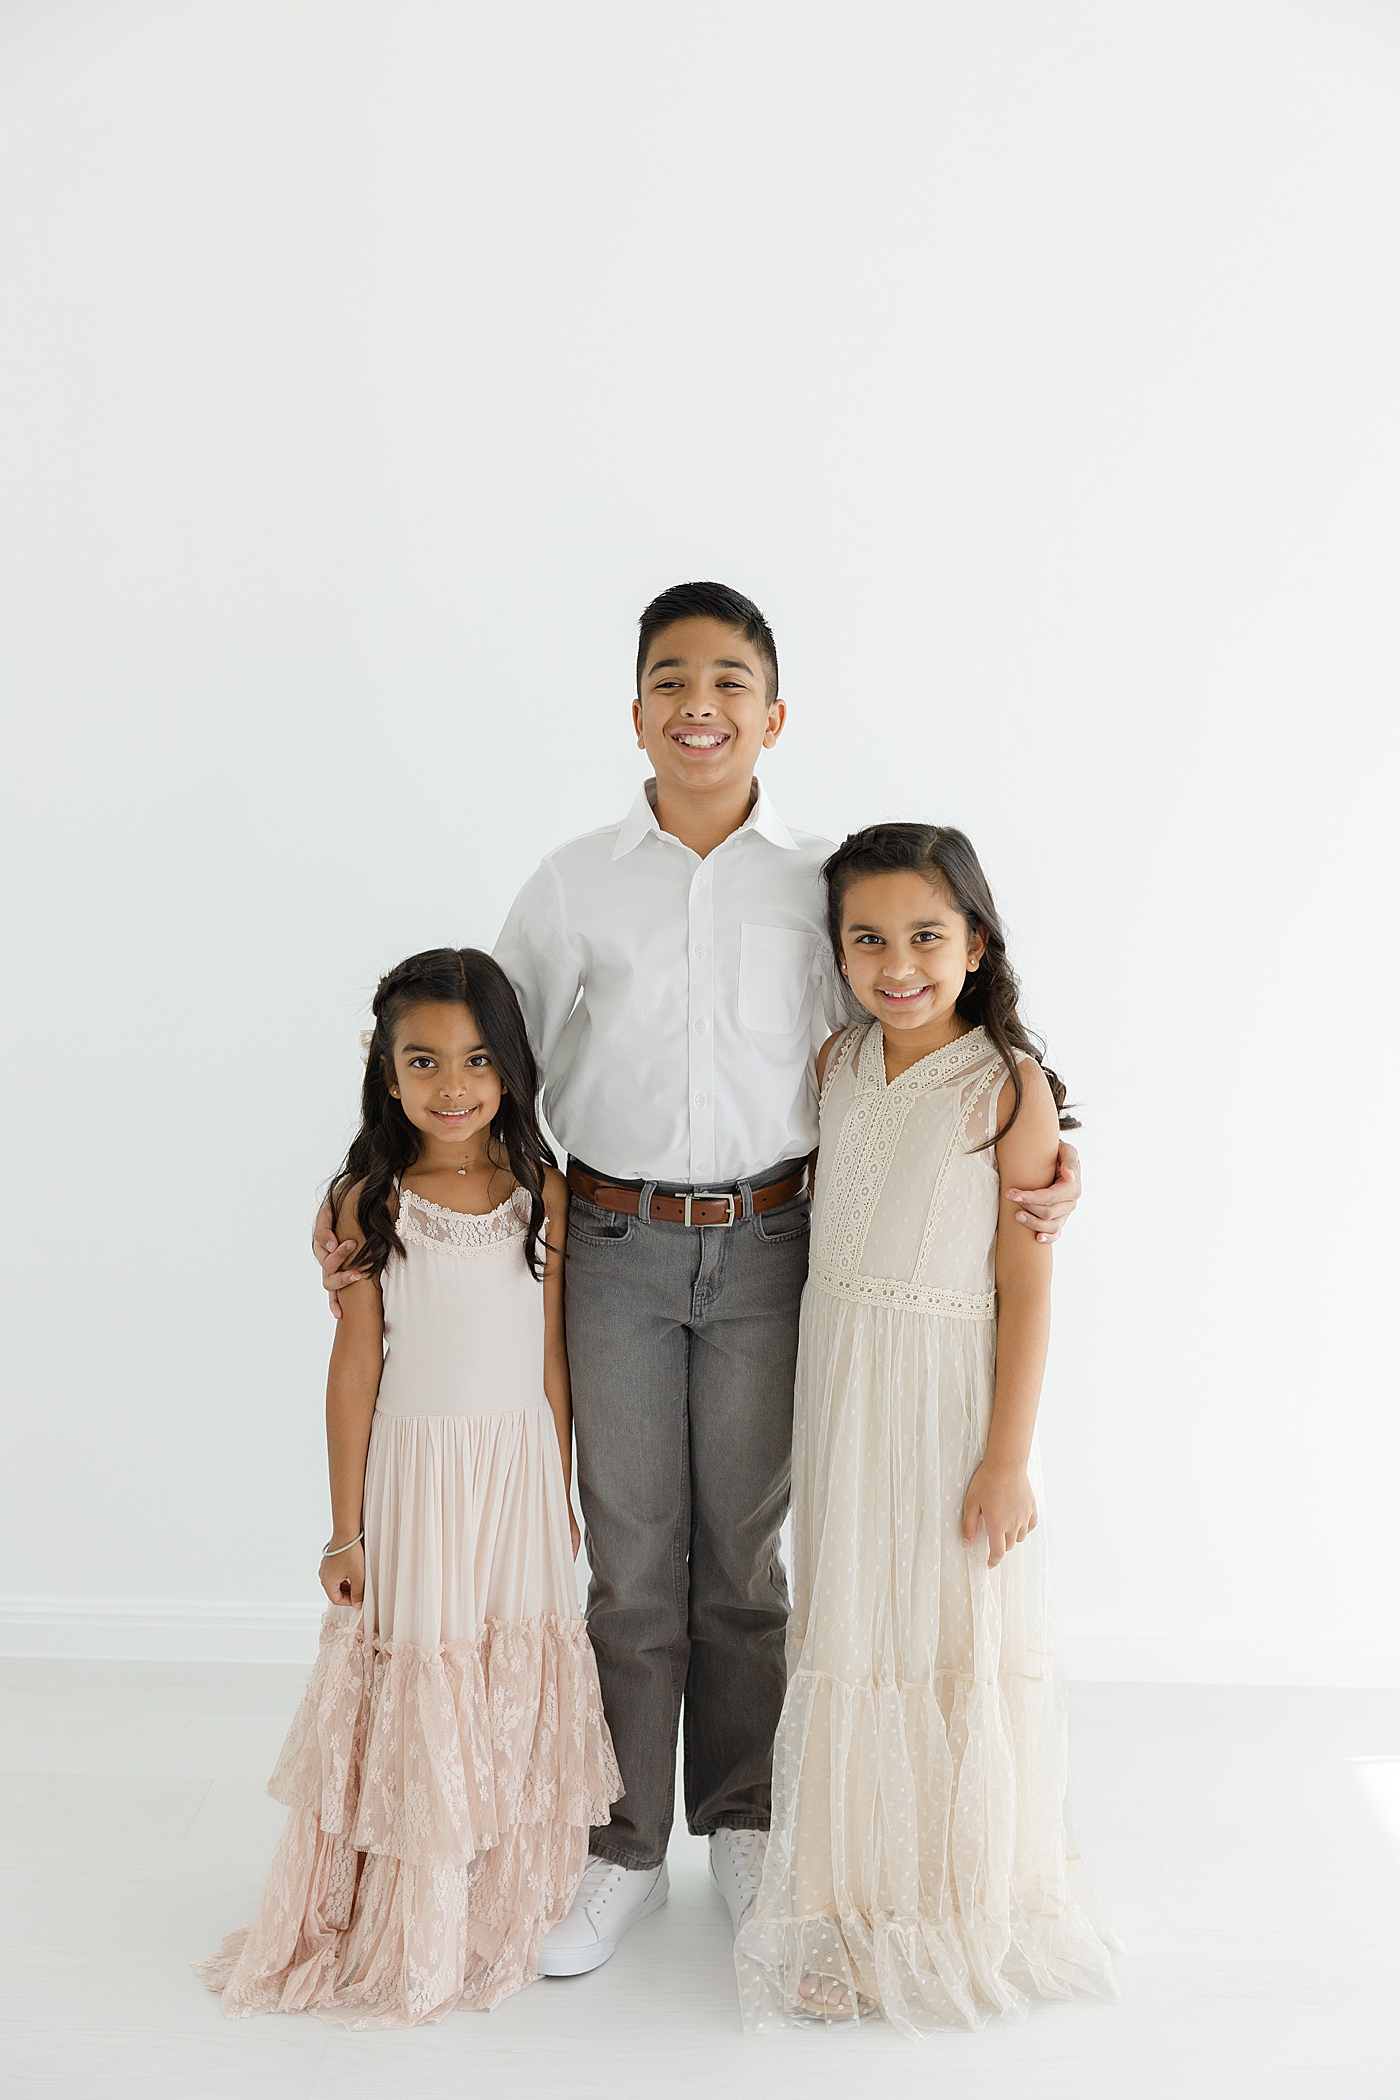 Brother with his two sisters in the studio | Image by Sana Ahmed Photography